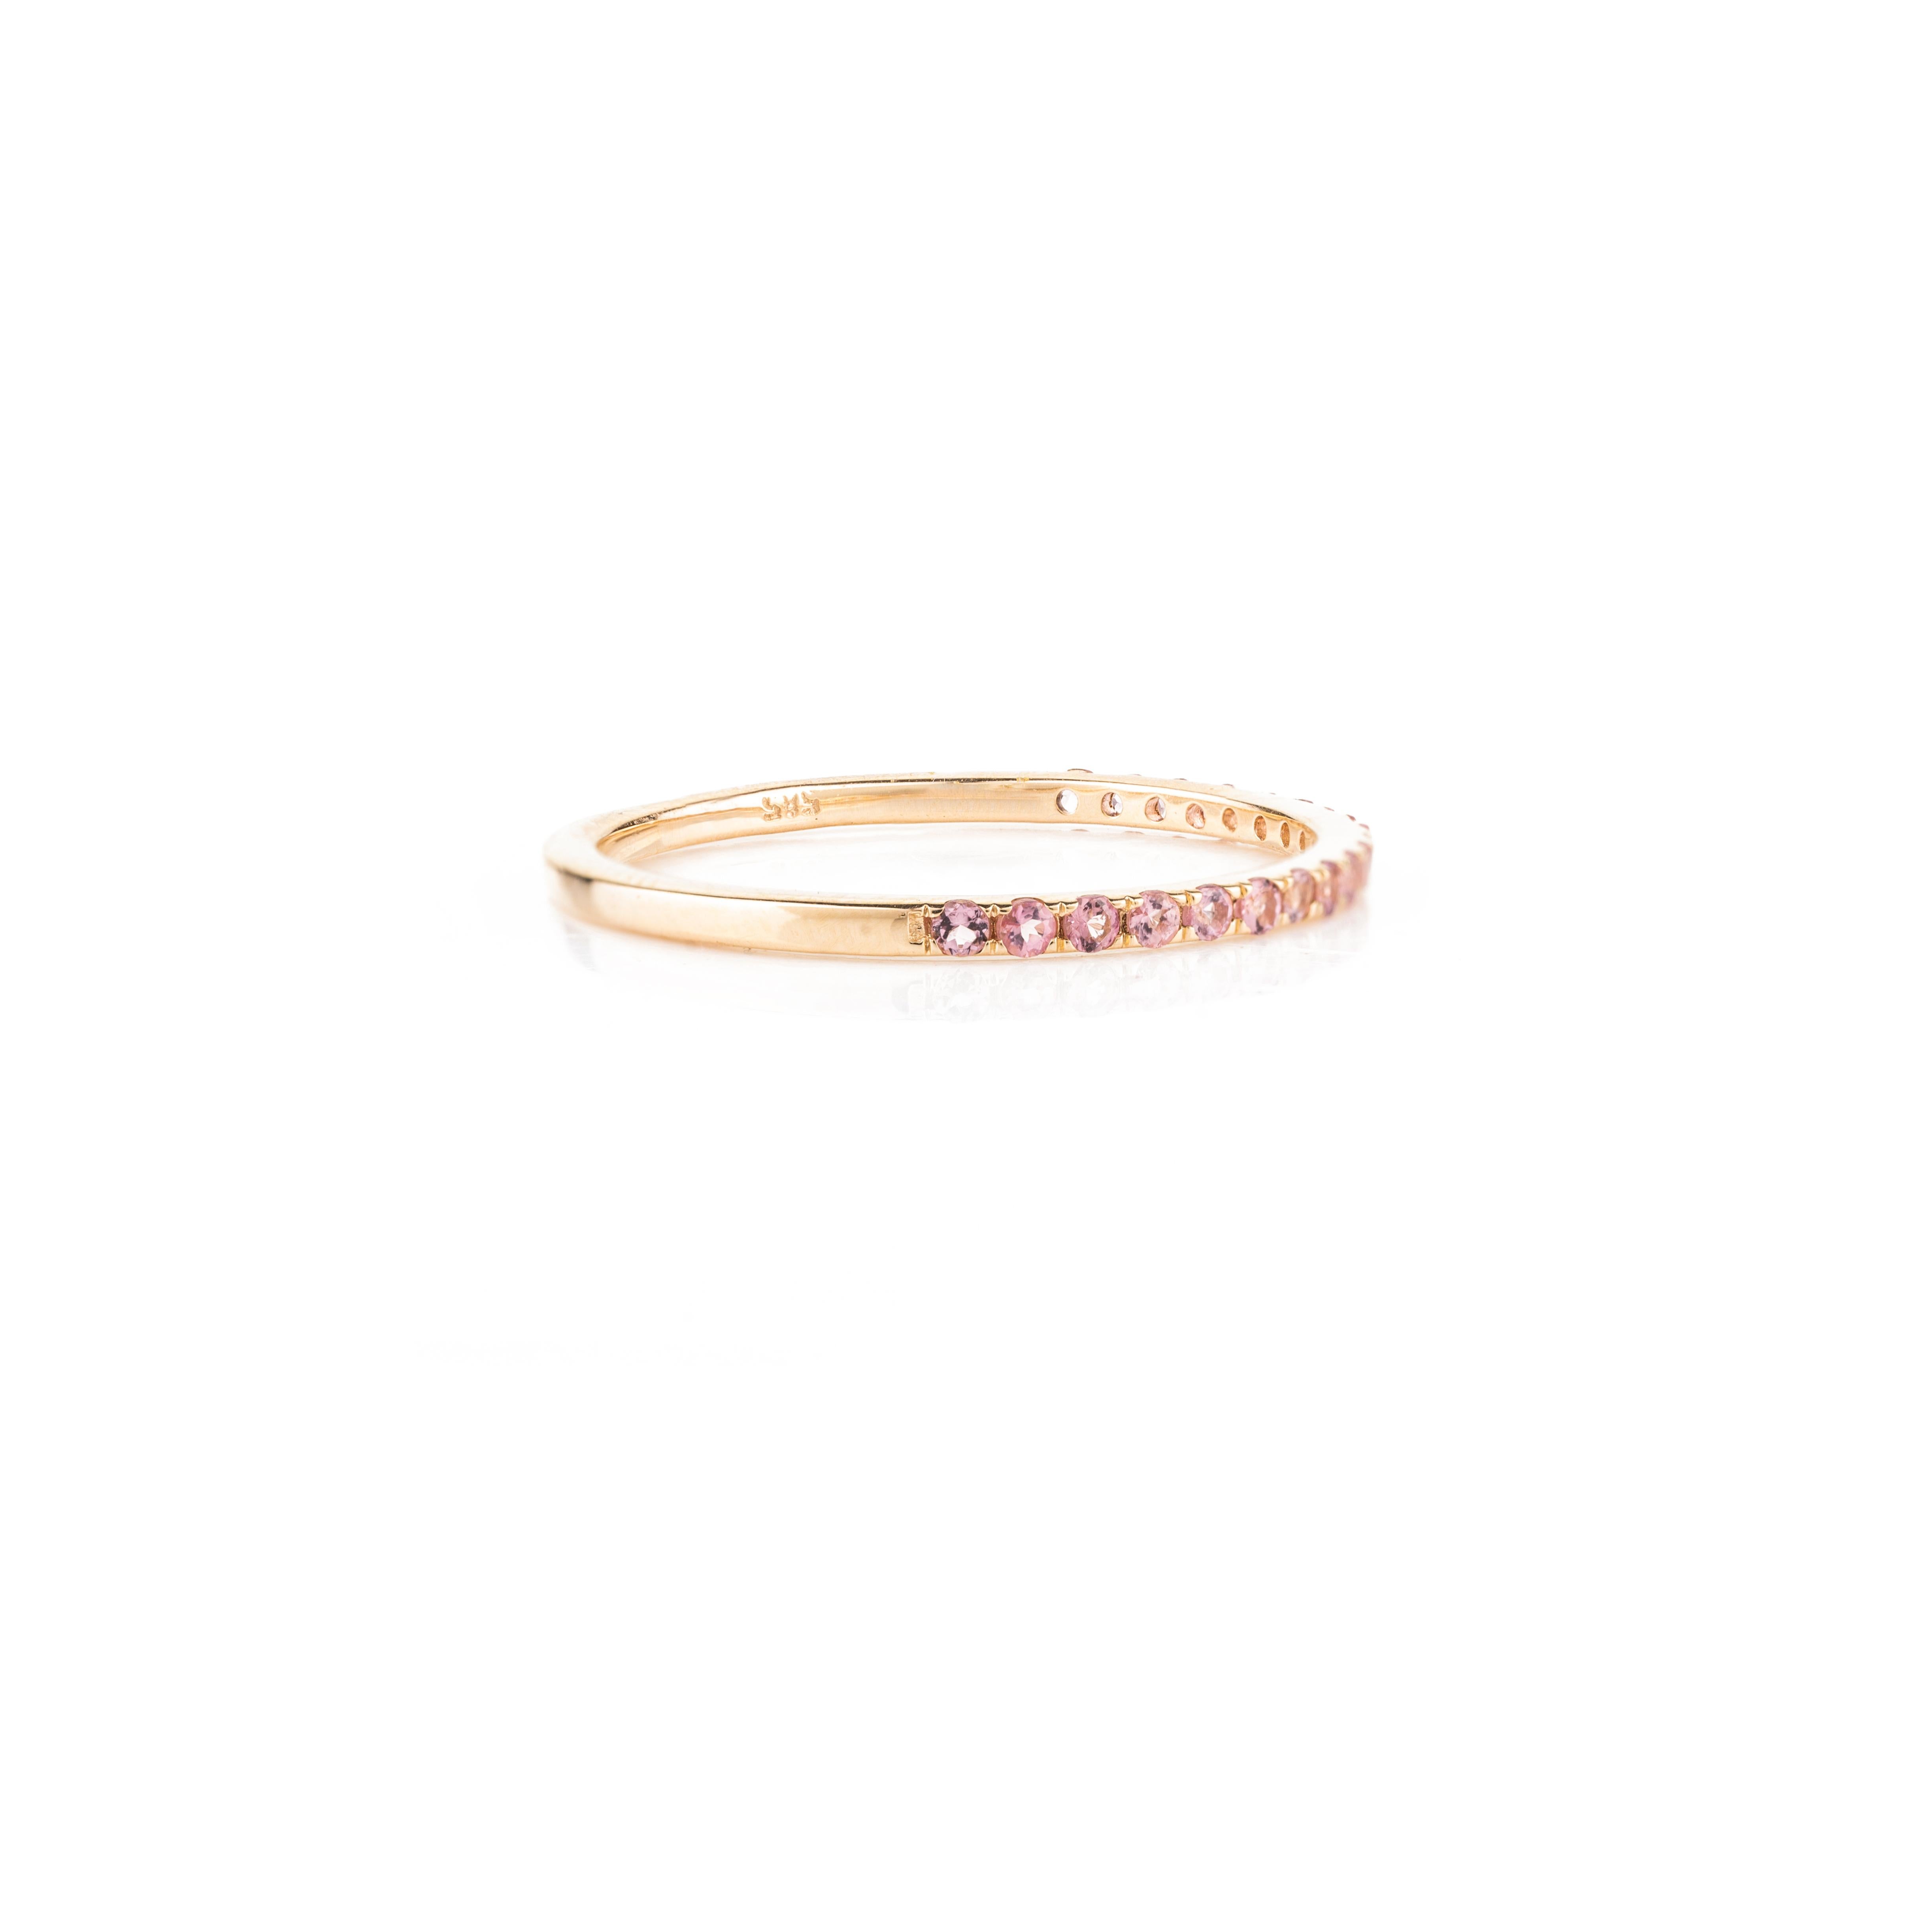 For Sale:  Stackable Thin 14k Solid Yellow Gold Tourmaline Band Ring Gift for Her 4